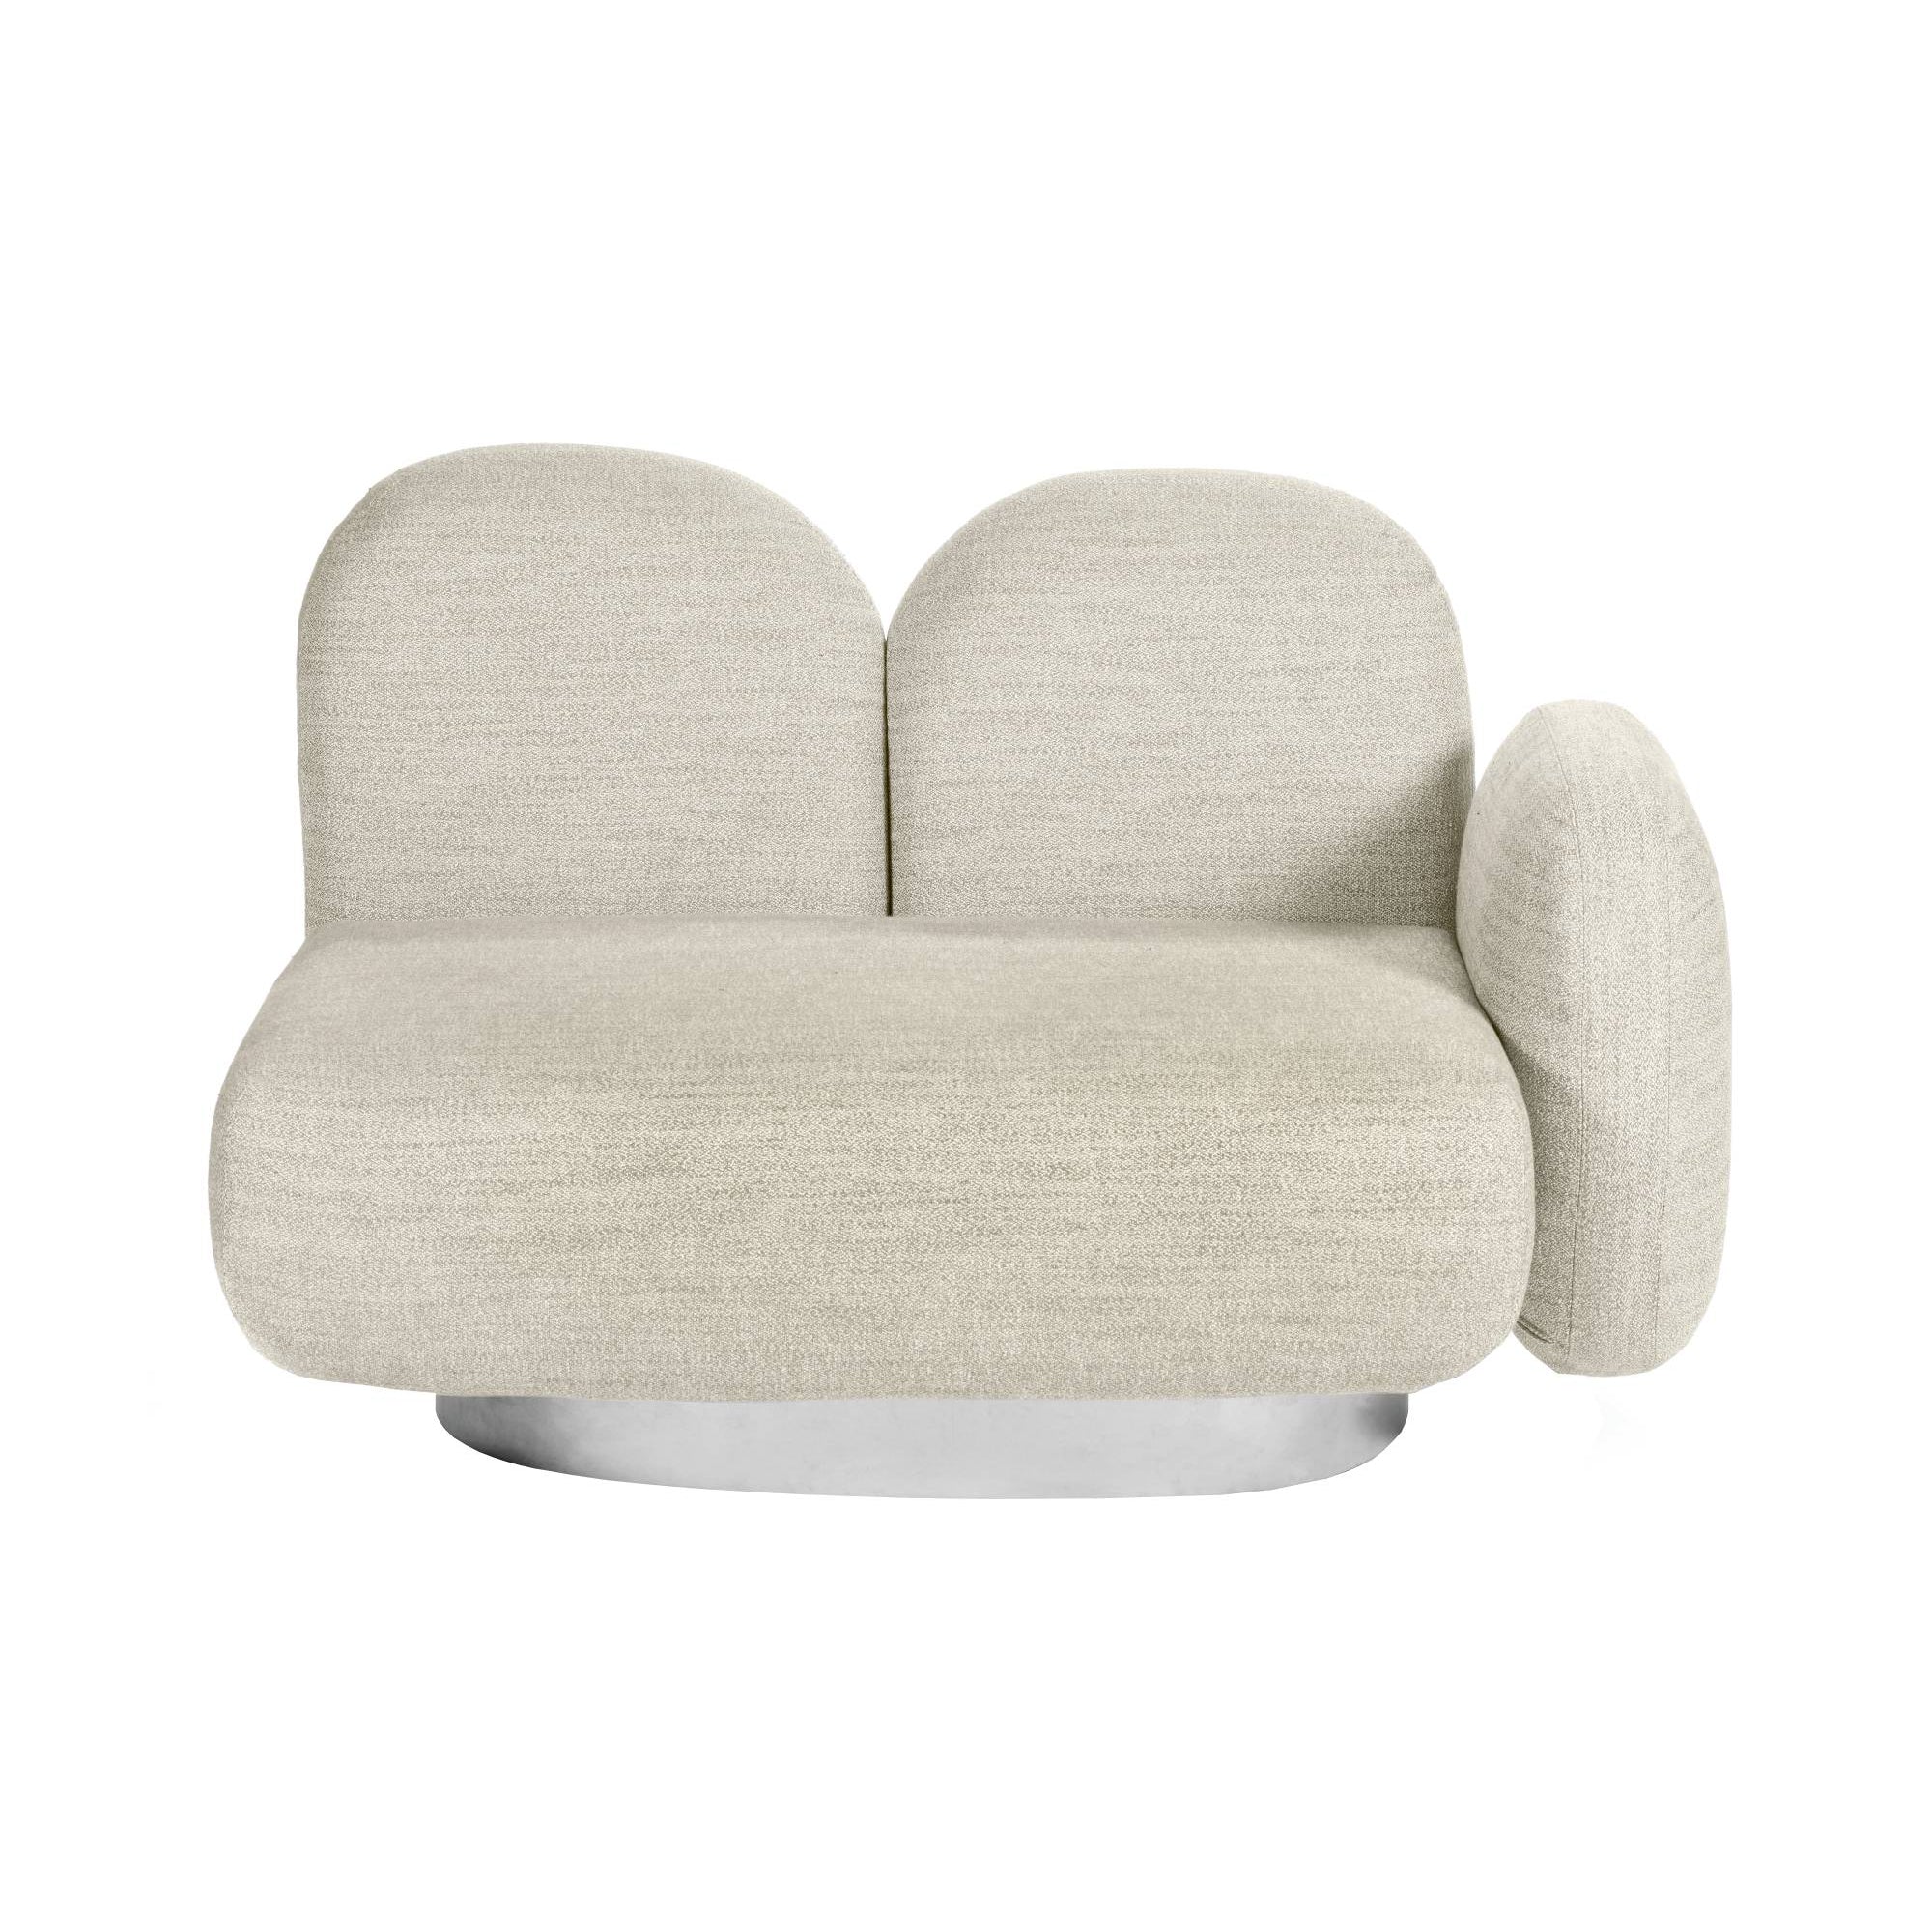 Assemble 1 Seat Sofa: Gijon Sand + With Right Arm